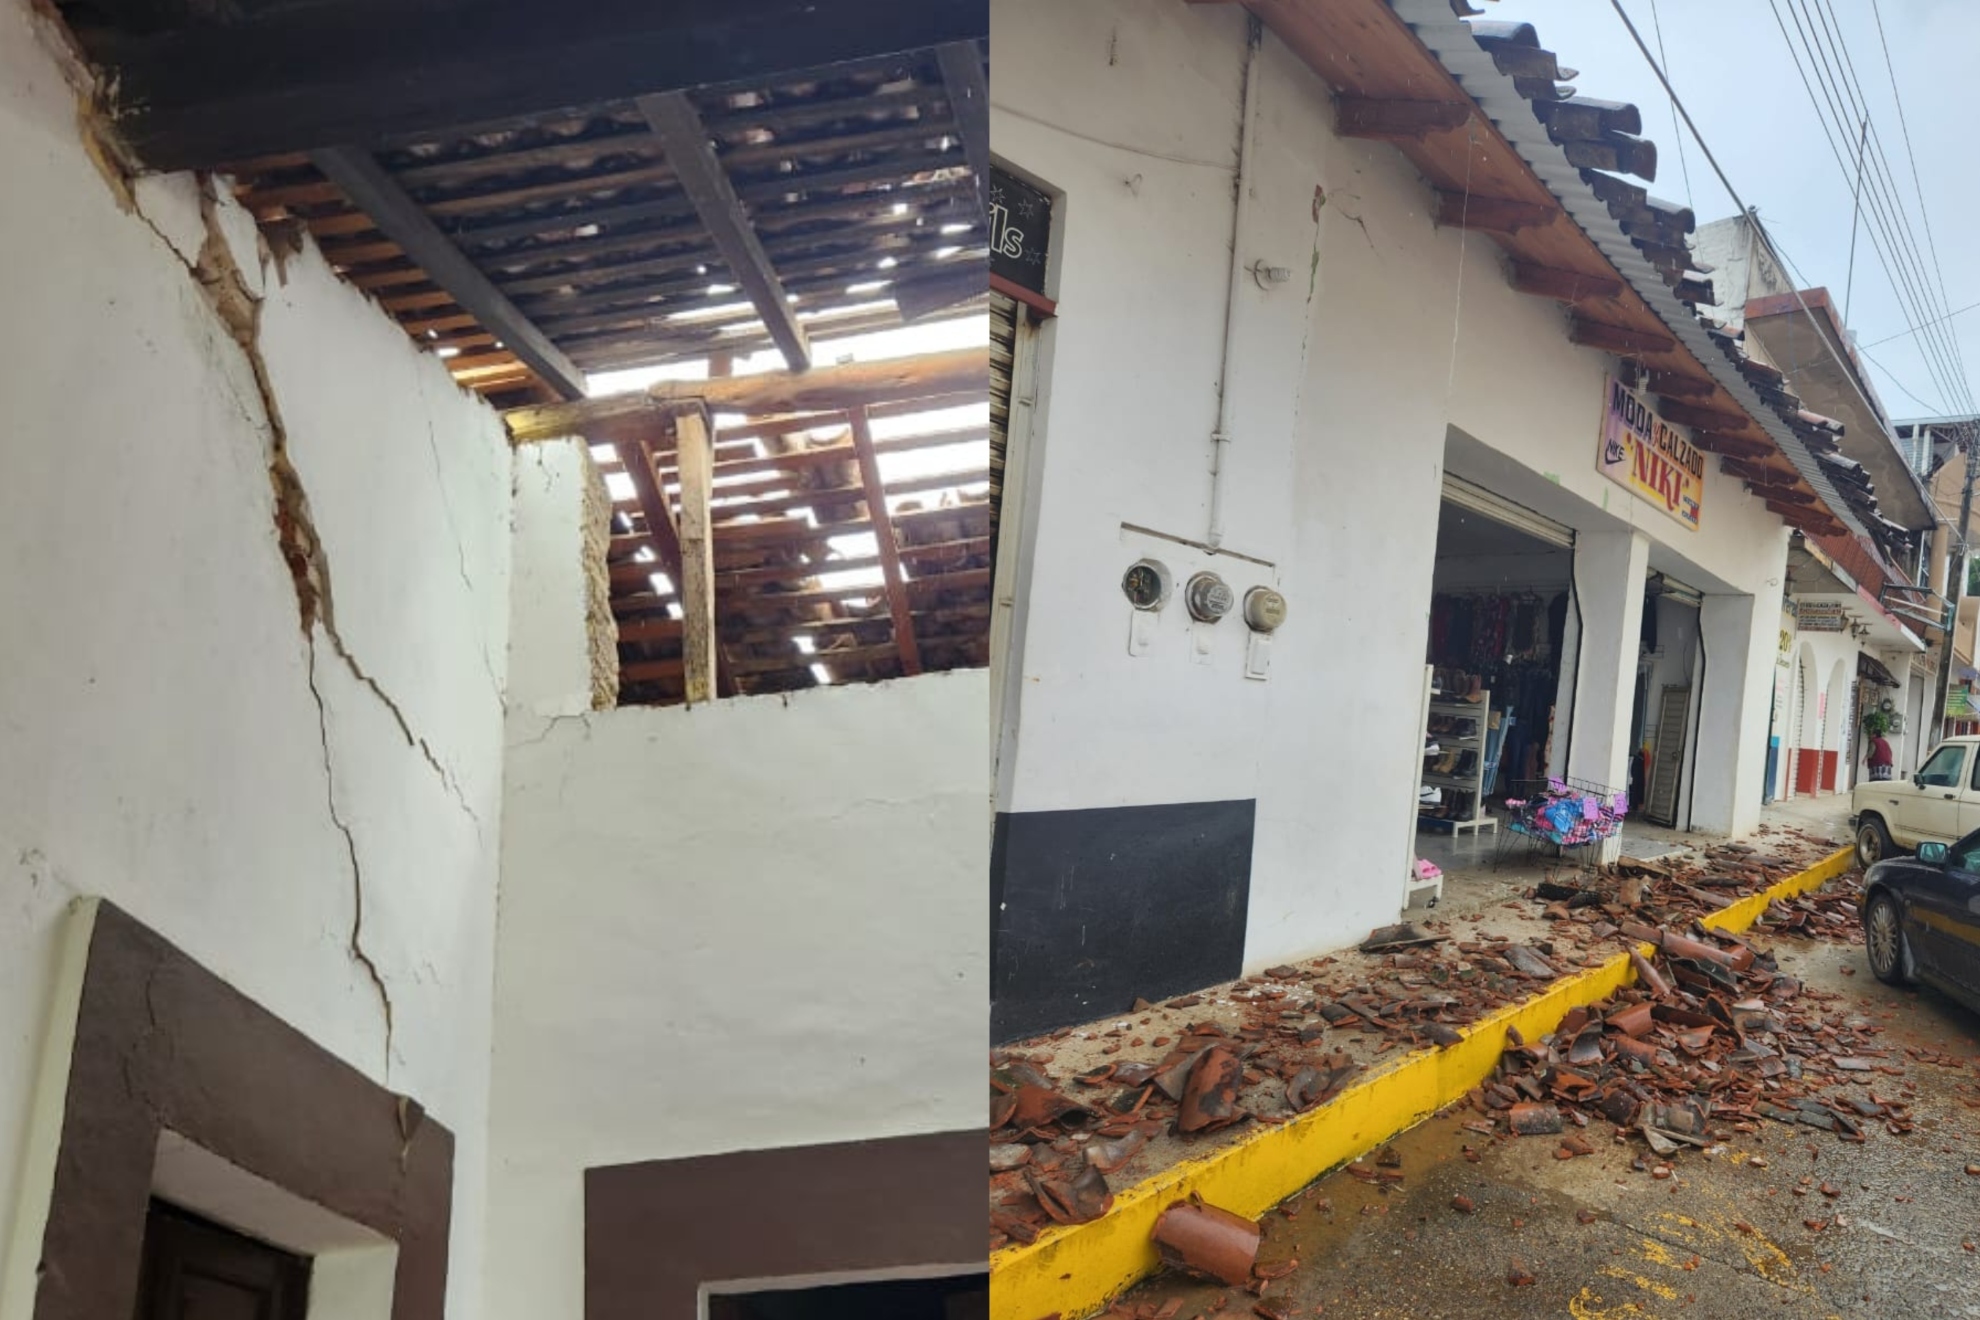 Several buildings and structures suffered damages during the earthquake